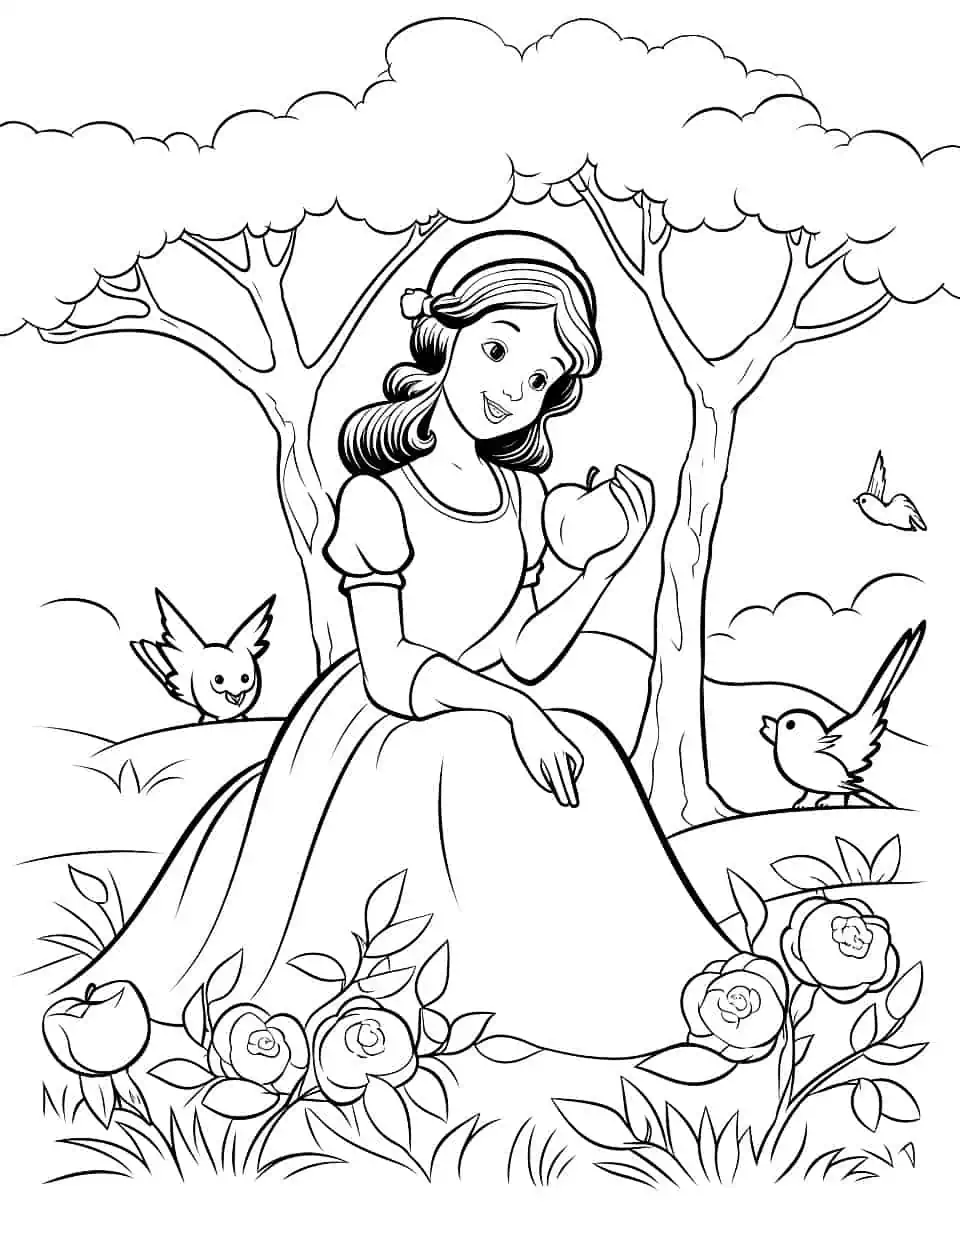 Snow White in Spring Coloring Page - Snow White enjoying spring with her animal friends.